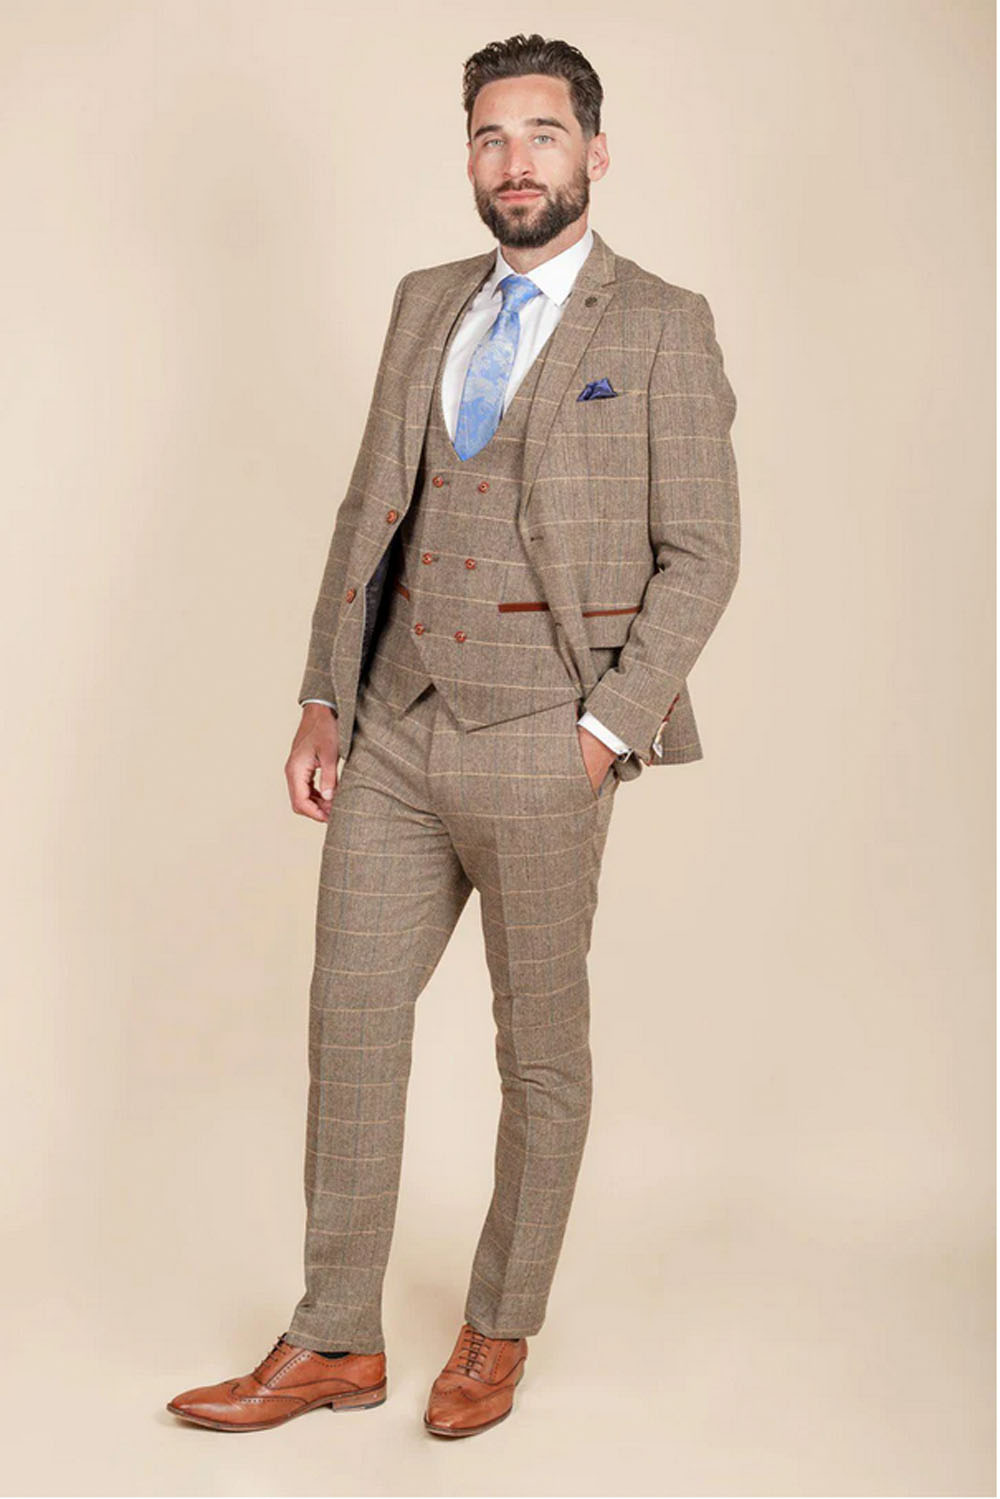 Ted Tan Tweed Check Jacket with Paisley Navy Lining Tan Tweed Check Double-breasted Waistcoat Tan Tweed Check Trousers